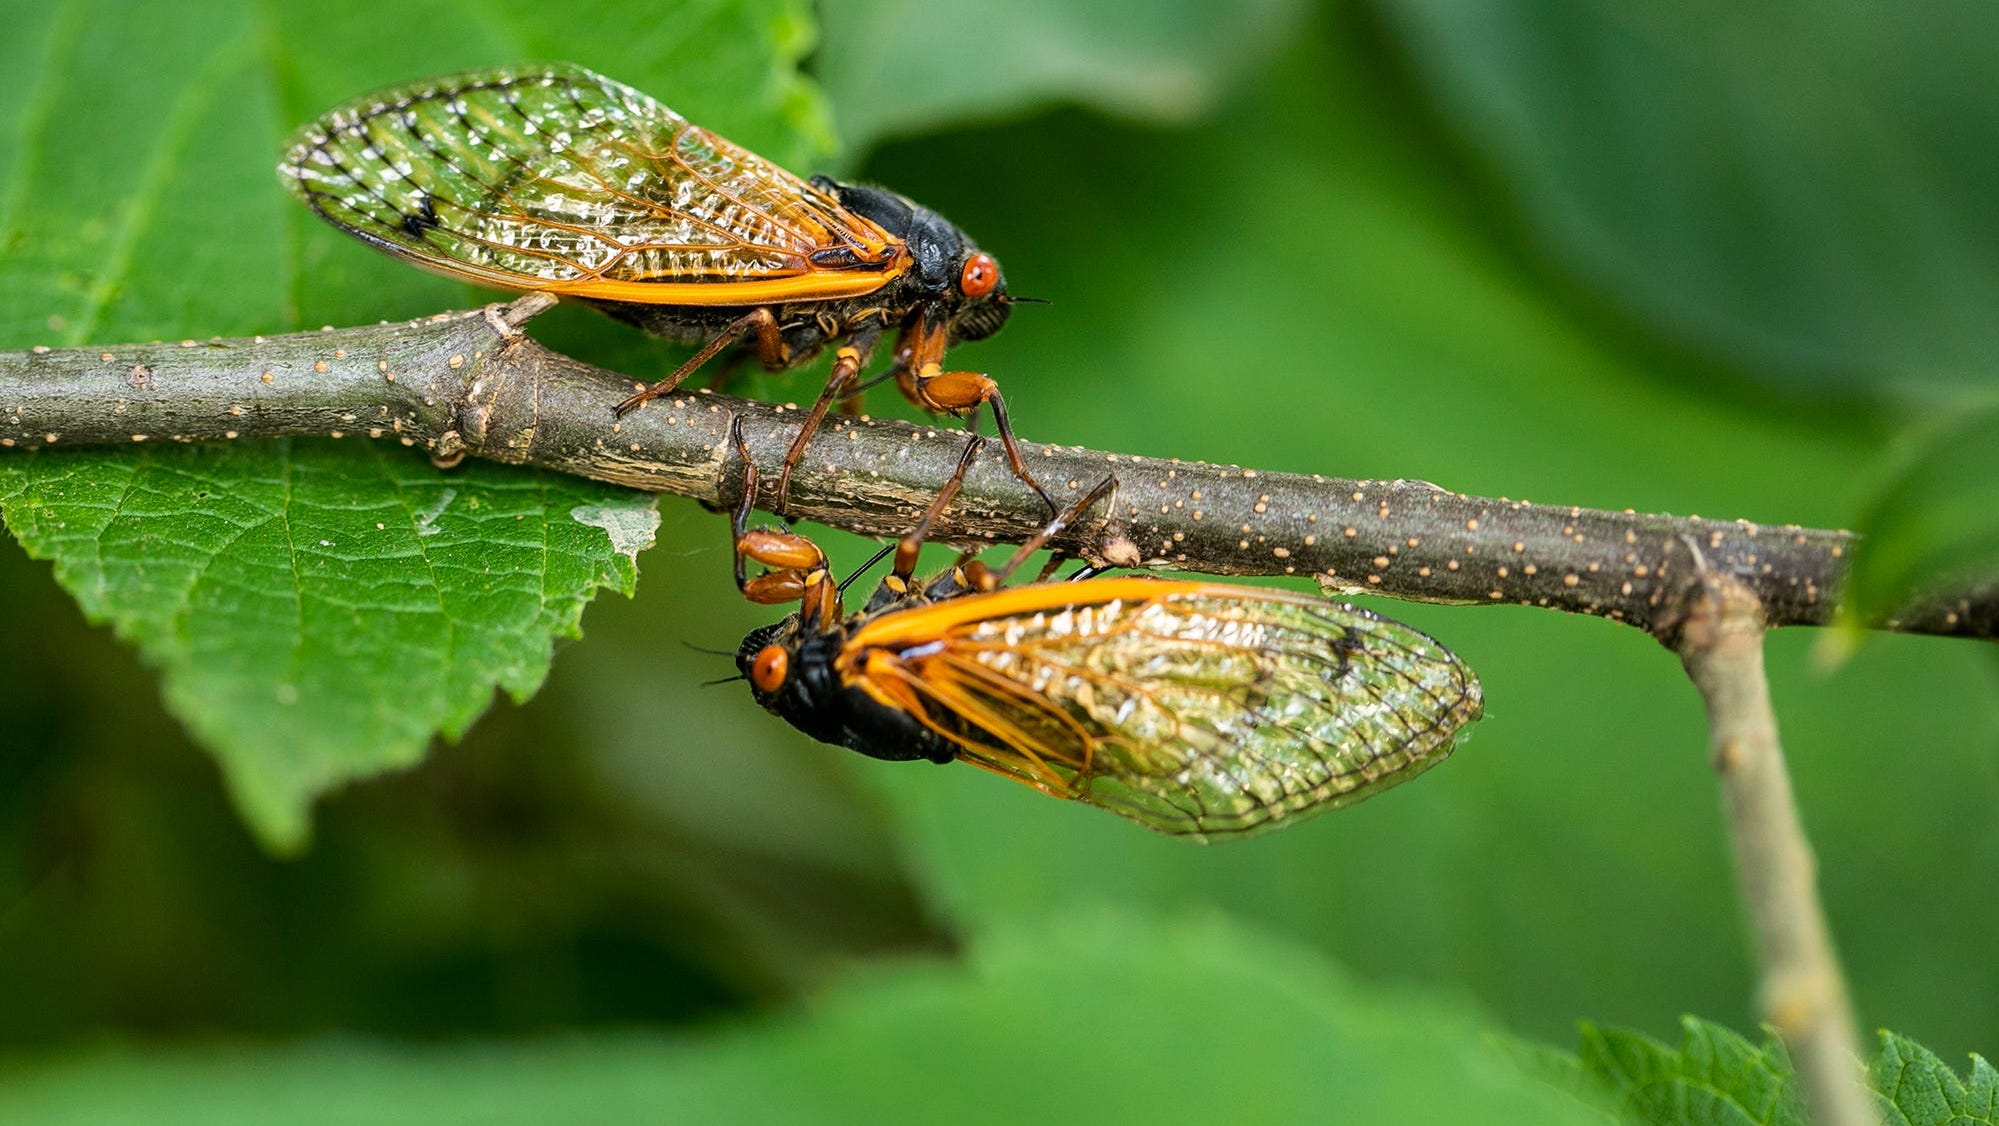 Massive cicada broods expected to emerge soon. Here are 3 things to know about them.